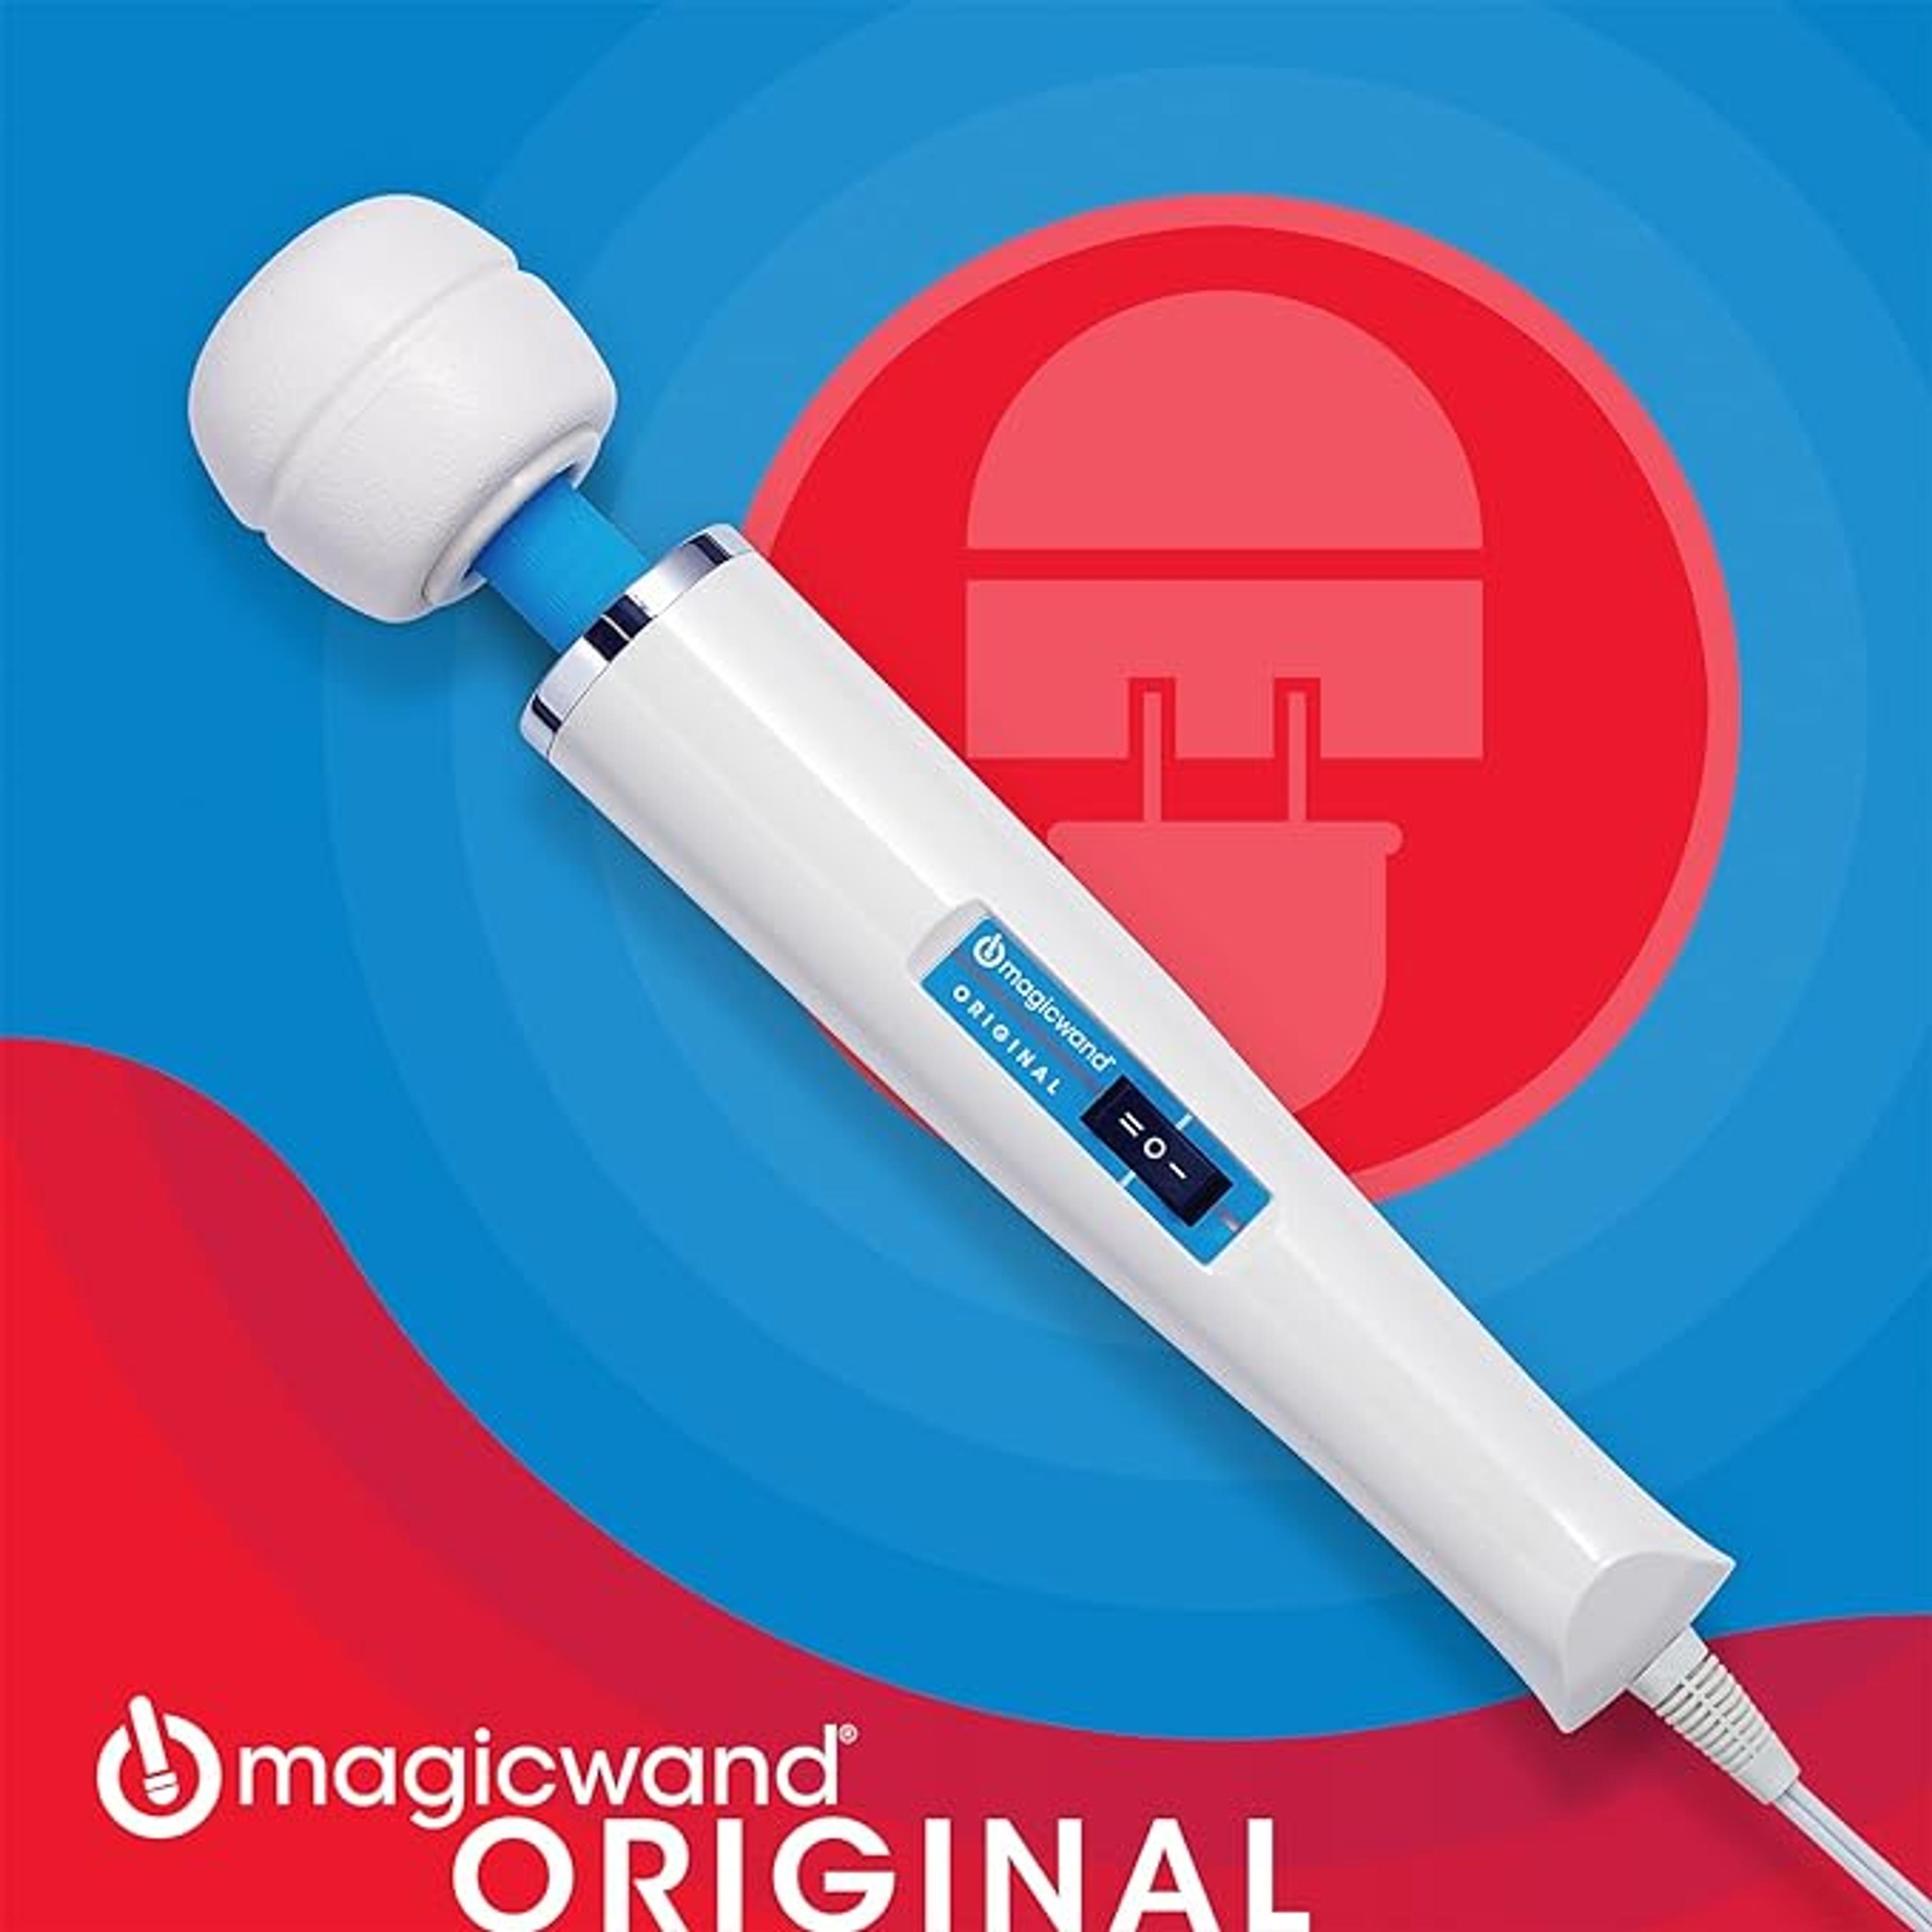 Amazon.com: Authentic Magic Wand Massager Original HV-260 – Plug-in 2-Speed with Flexible Neck & Ultra-Powerful Motor for Deep, Rumbling, Muscle Relaxing Vibrations. 6-Foot Cord, 1-Year Warranty : Everything Else